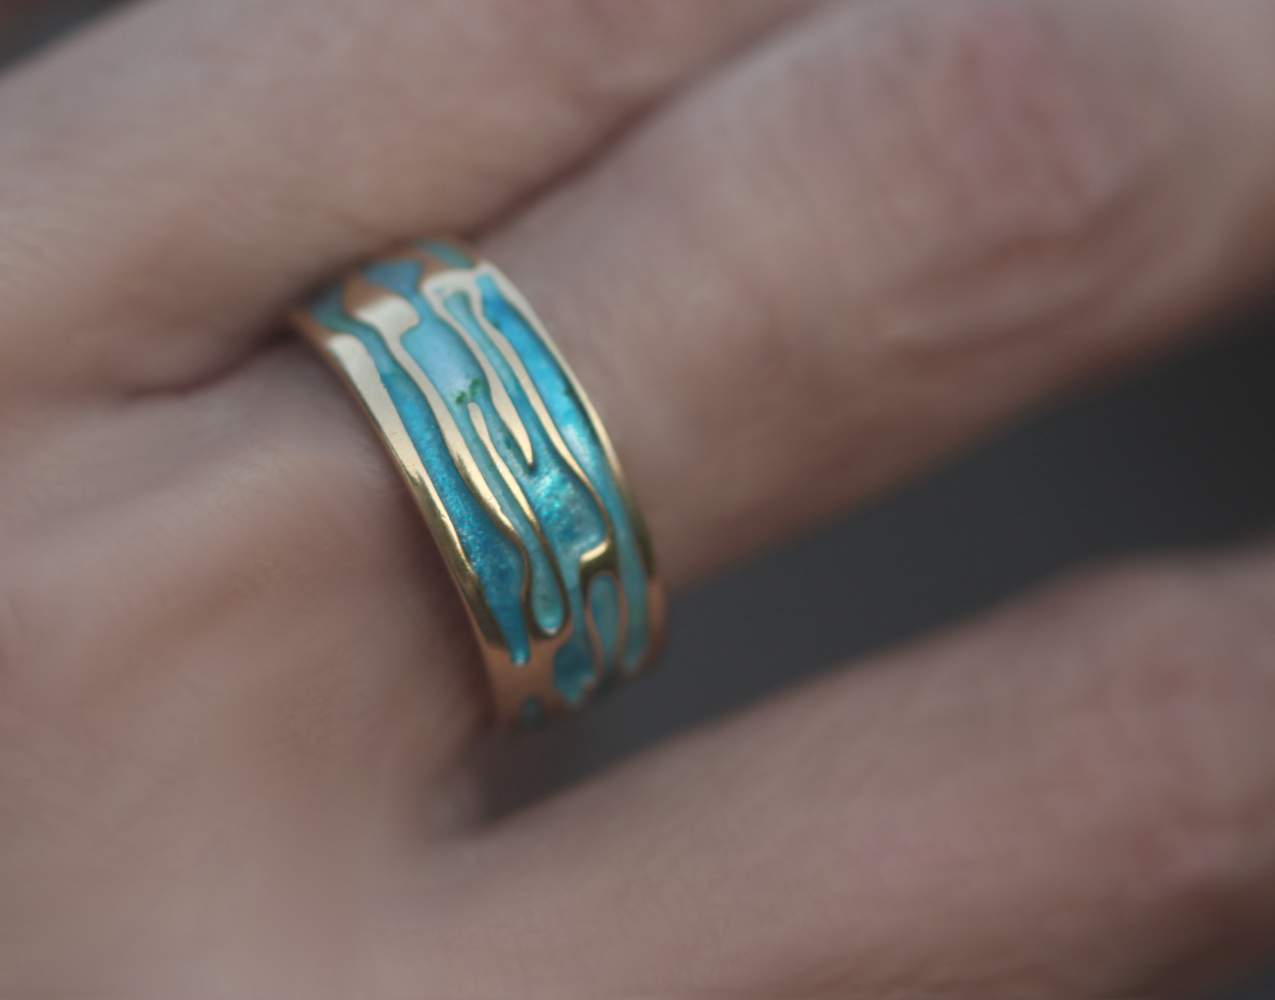 Ocean Ring. 18k gold plated sterling silver. Enamel in shades of turquoise